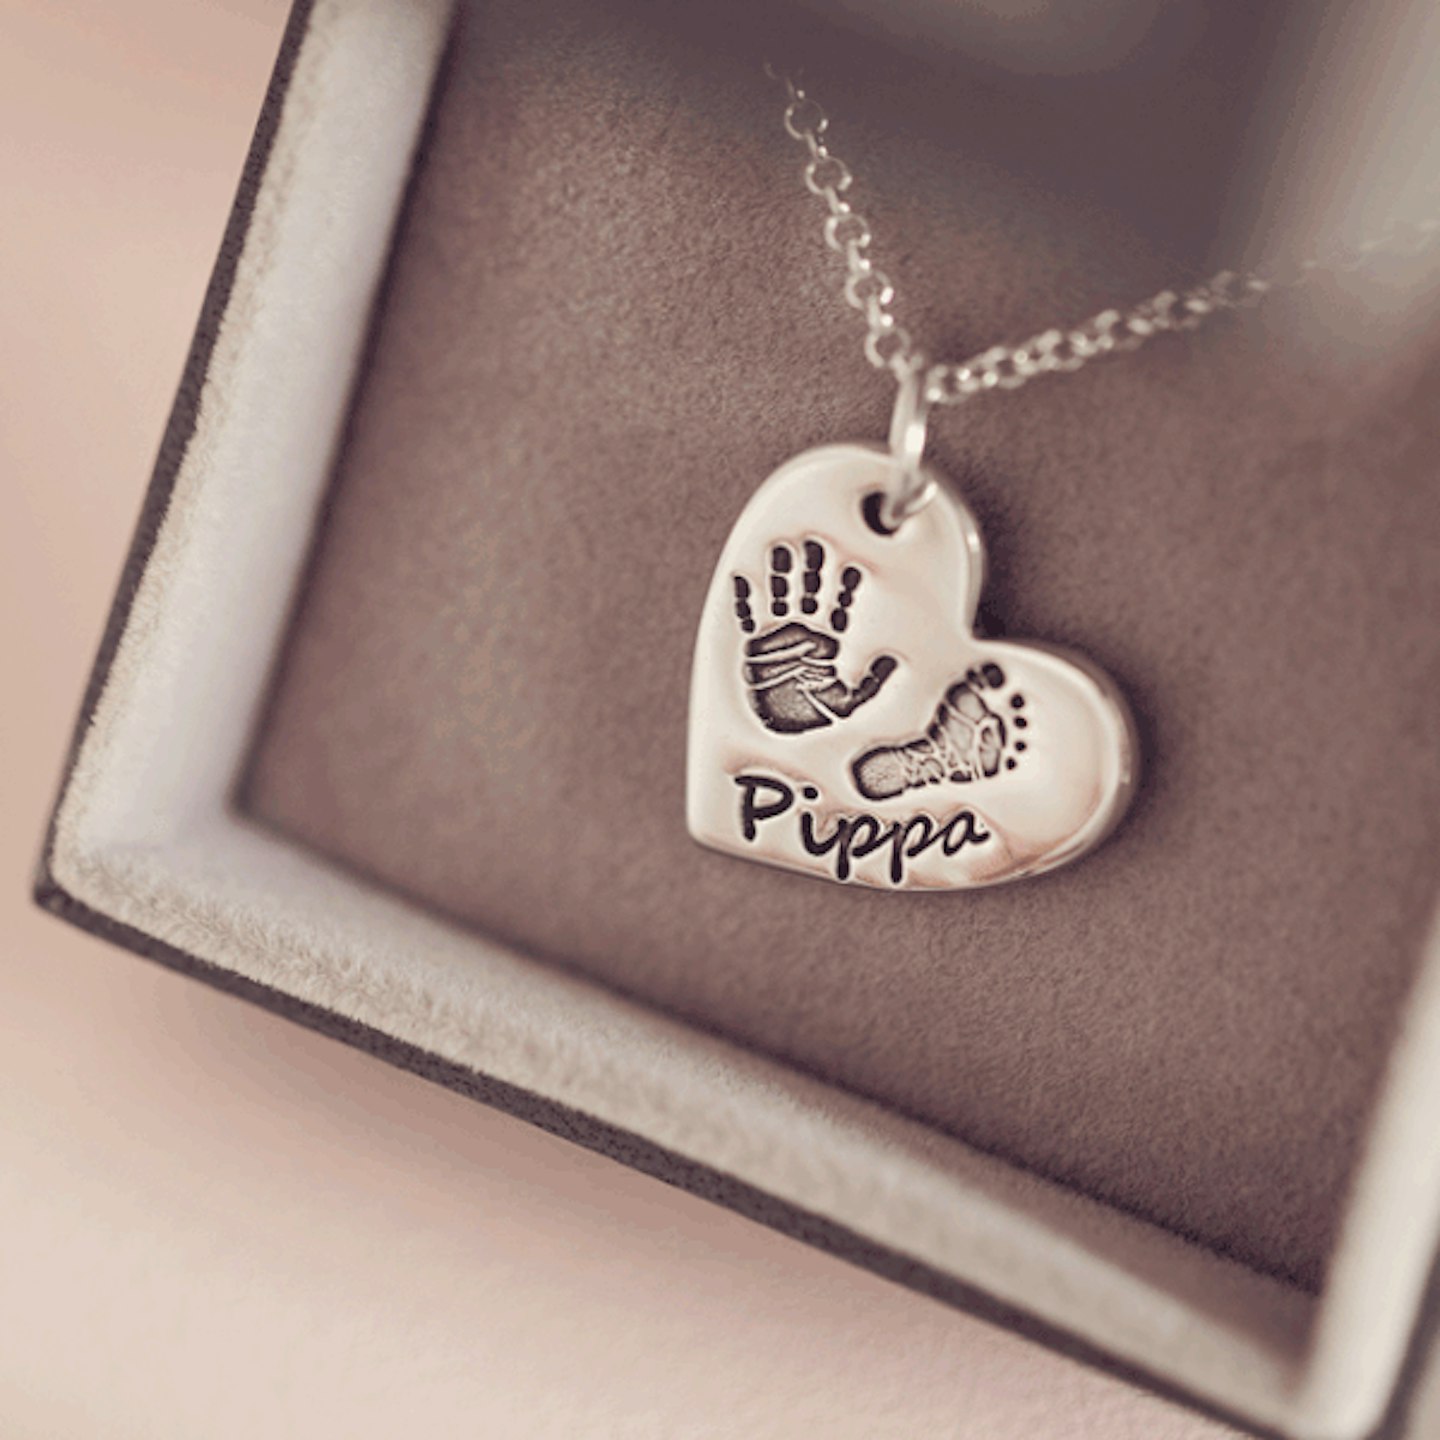 Best push present gifts Handprint or Footprint Large Heart Necklace